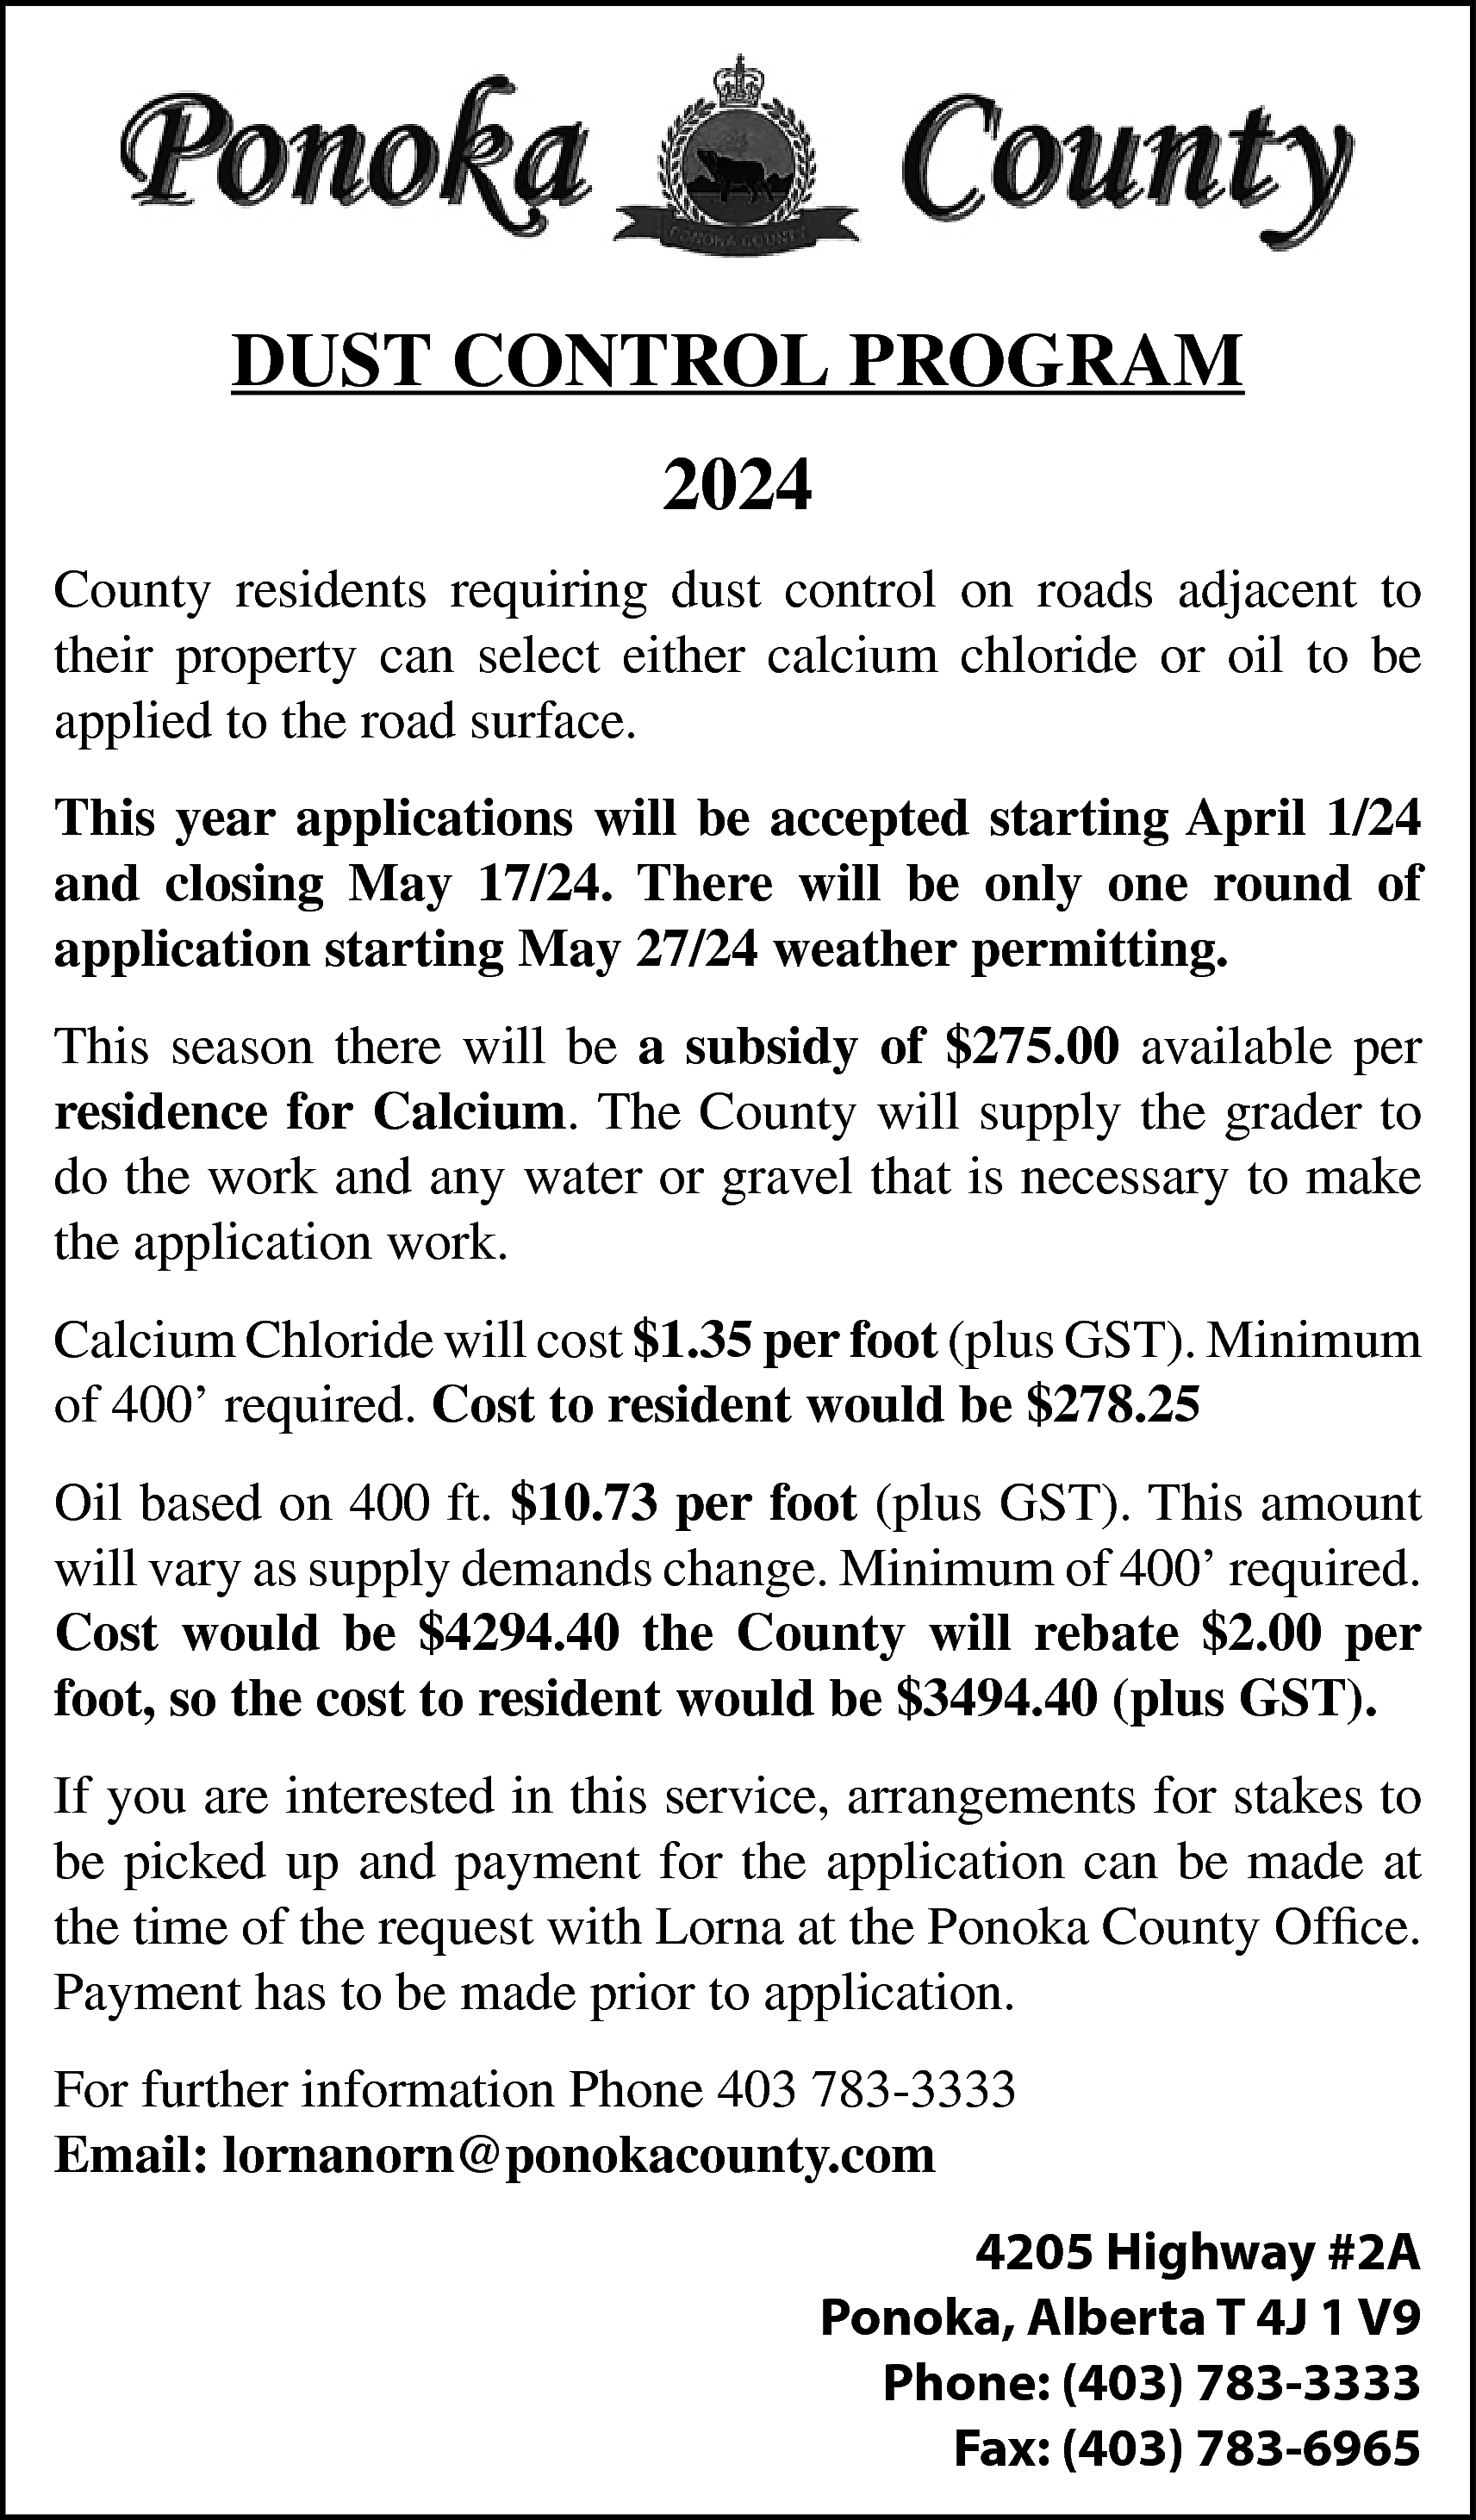 DUST CONTROL PROGRAM <br>2024 <br>County  DUST CONTROL PROGRAM  2024  County residents requiring dust control on roads adjacent to  their property can select either calcium chloride or oil to be  applied to the road surface.  This year applications will be accepted starting April 1/24  and closing May 17/24. There will be only one round of  application starting May 27/24 weather permitting.  This season there will be a subsidy of $275.00 available per  residence for Calcium. The County will supply the grader to  do the work and any water or gravel that is necessary to make  the application work.  Calcium Chloride will cost $1.35 per foot (plus GST). Minimum  of 400’ required. Cost to resident would be $278.25  Oil based on 400 ft. $10.73 per foot (plus GST). This amount  will vary as supply demands change. Minimum of 400’ required.  Cost would be $4294.40 the County will rebate $2.00 per  foot, so the cost to resident would be $3494.40 (plus GST).  If you are interested in this service, arrangements for stakes to  be picked up and payment for the application can be made at  the time of the request with Lorna at the Ponoka County Office.  Payment has to be made prior to application.  For further information Phone 403 783-3333  Email: lornanorn@ponokacounty.com  4205 Highway #2A  Ponoka, Alberta T 4J 1 V9  Phone: (403) 783-3333  Fax: (403) 783-6965    